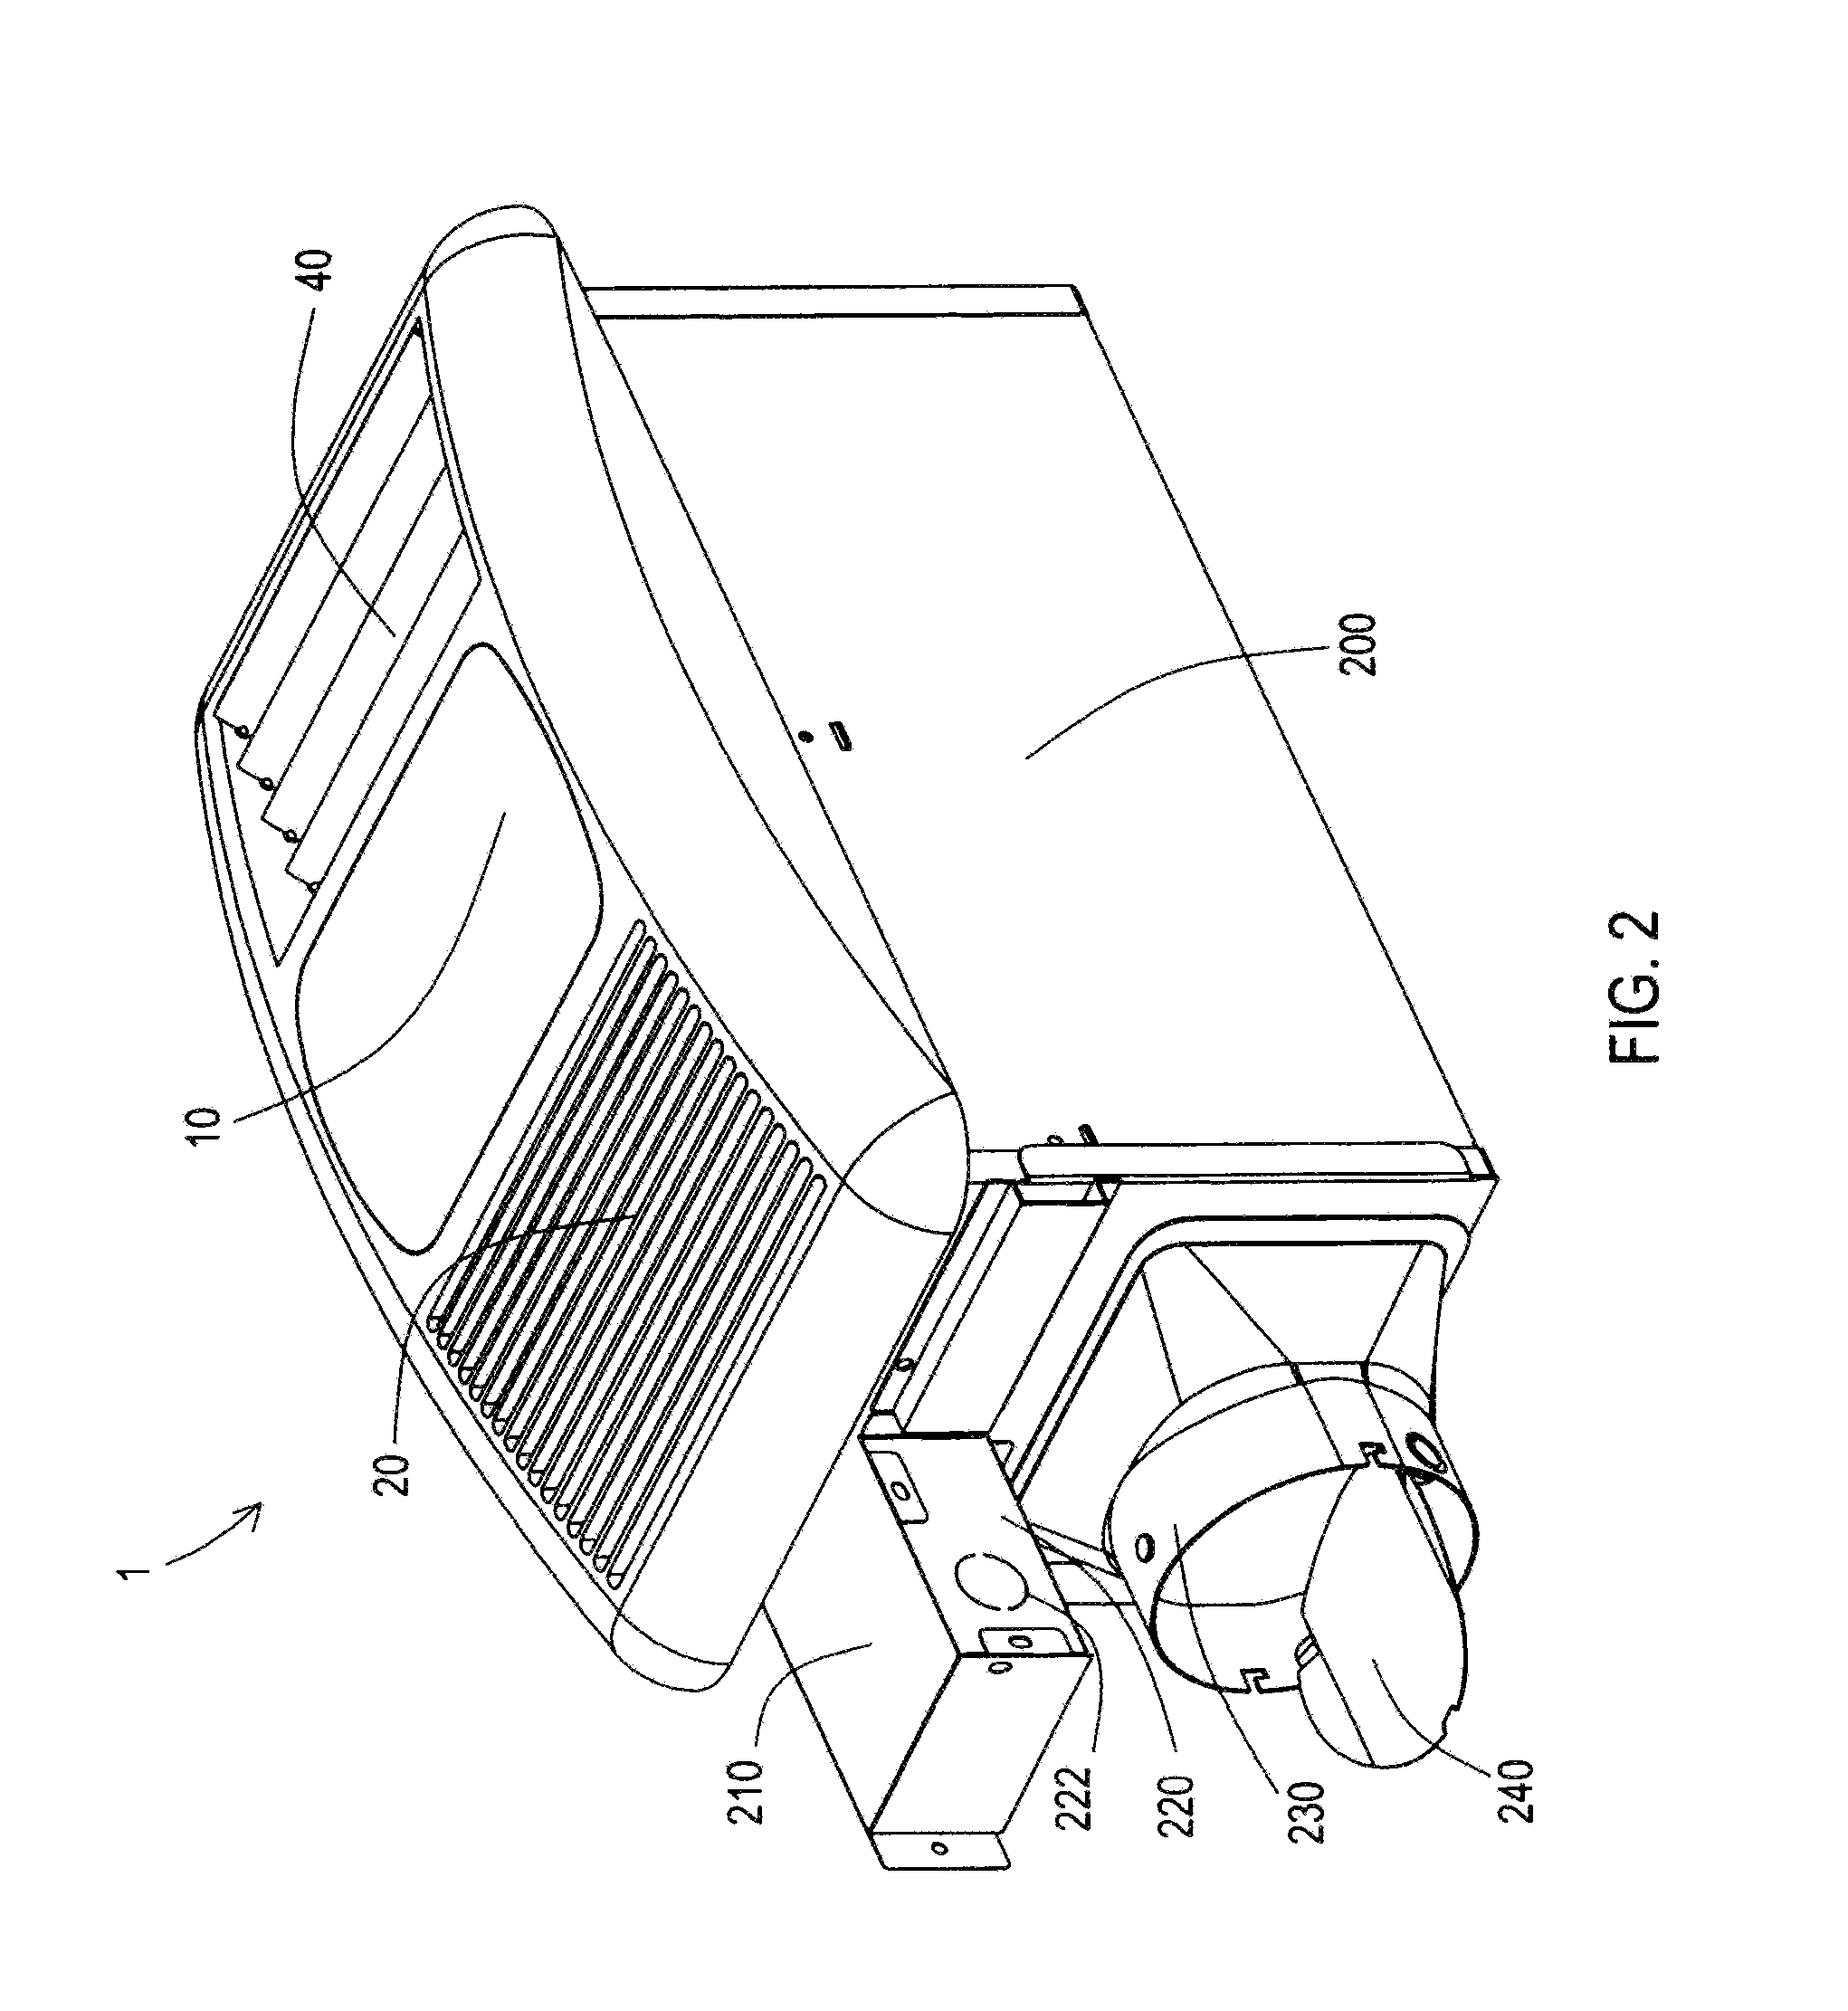 Bath fan and heater with cover having adjustable luver or depressible fastener and depressible release